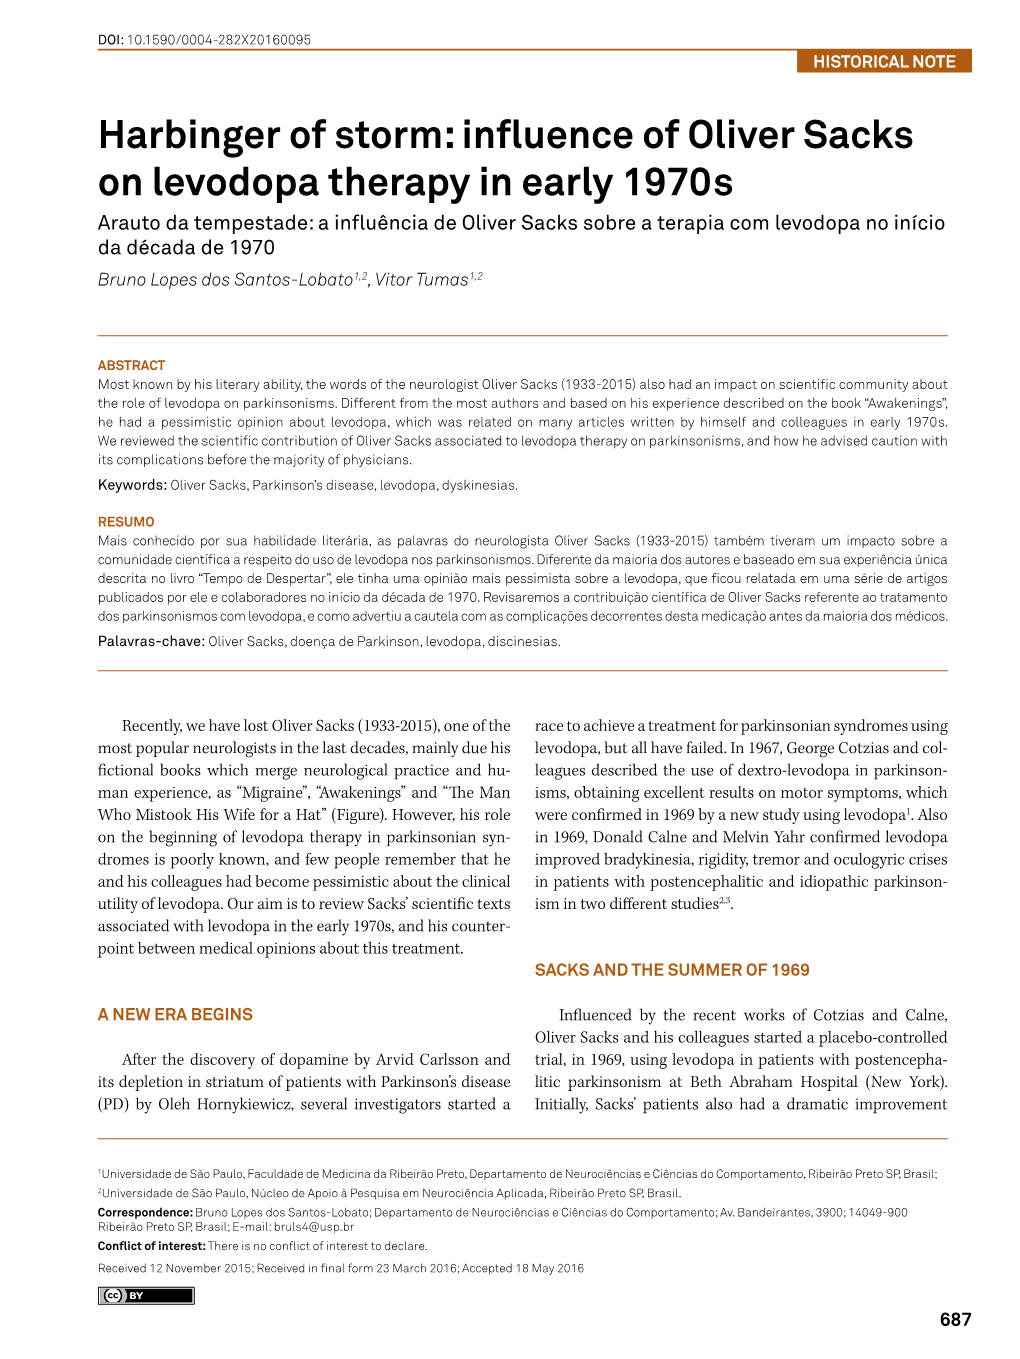 Influence of Oliver Sacks on Levodopa Therapy in Early 1970S